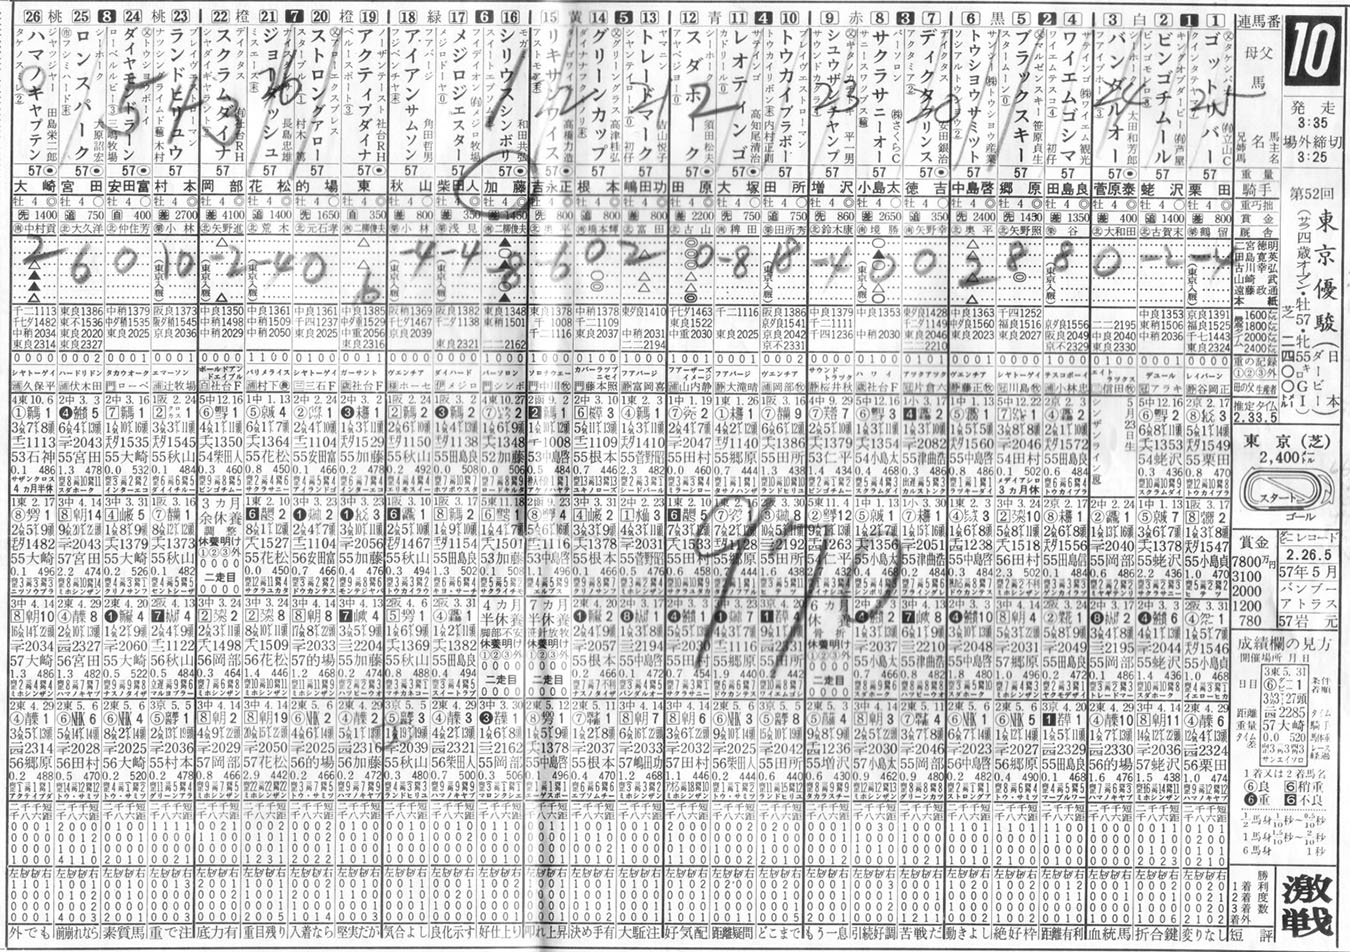 Image of newspaper statistics from one horse race, overwritten by the gambler’s hand. Like discarded gambling tickets, such newspaper pages could be found on the floors and in the garbage cans of WINS.